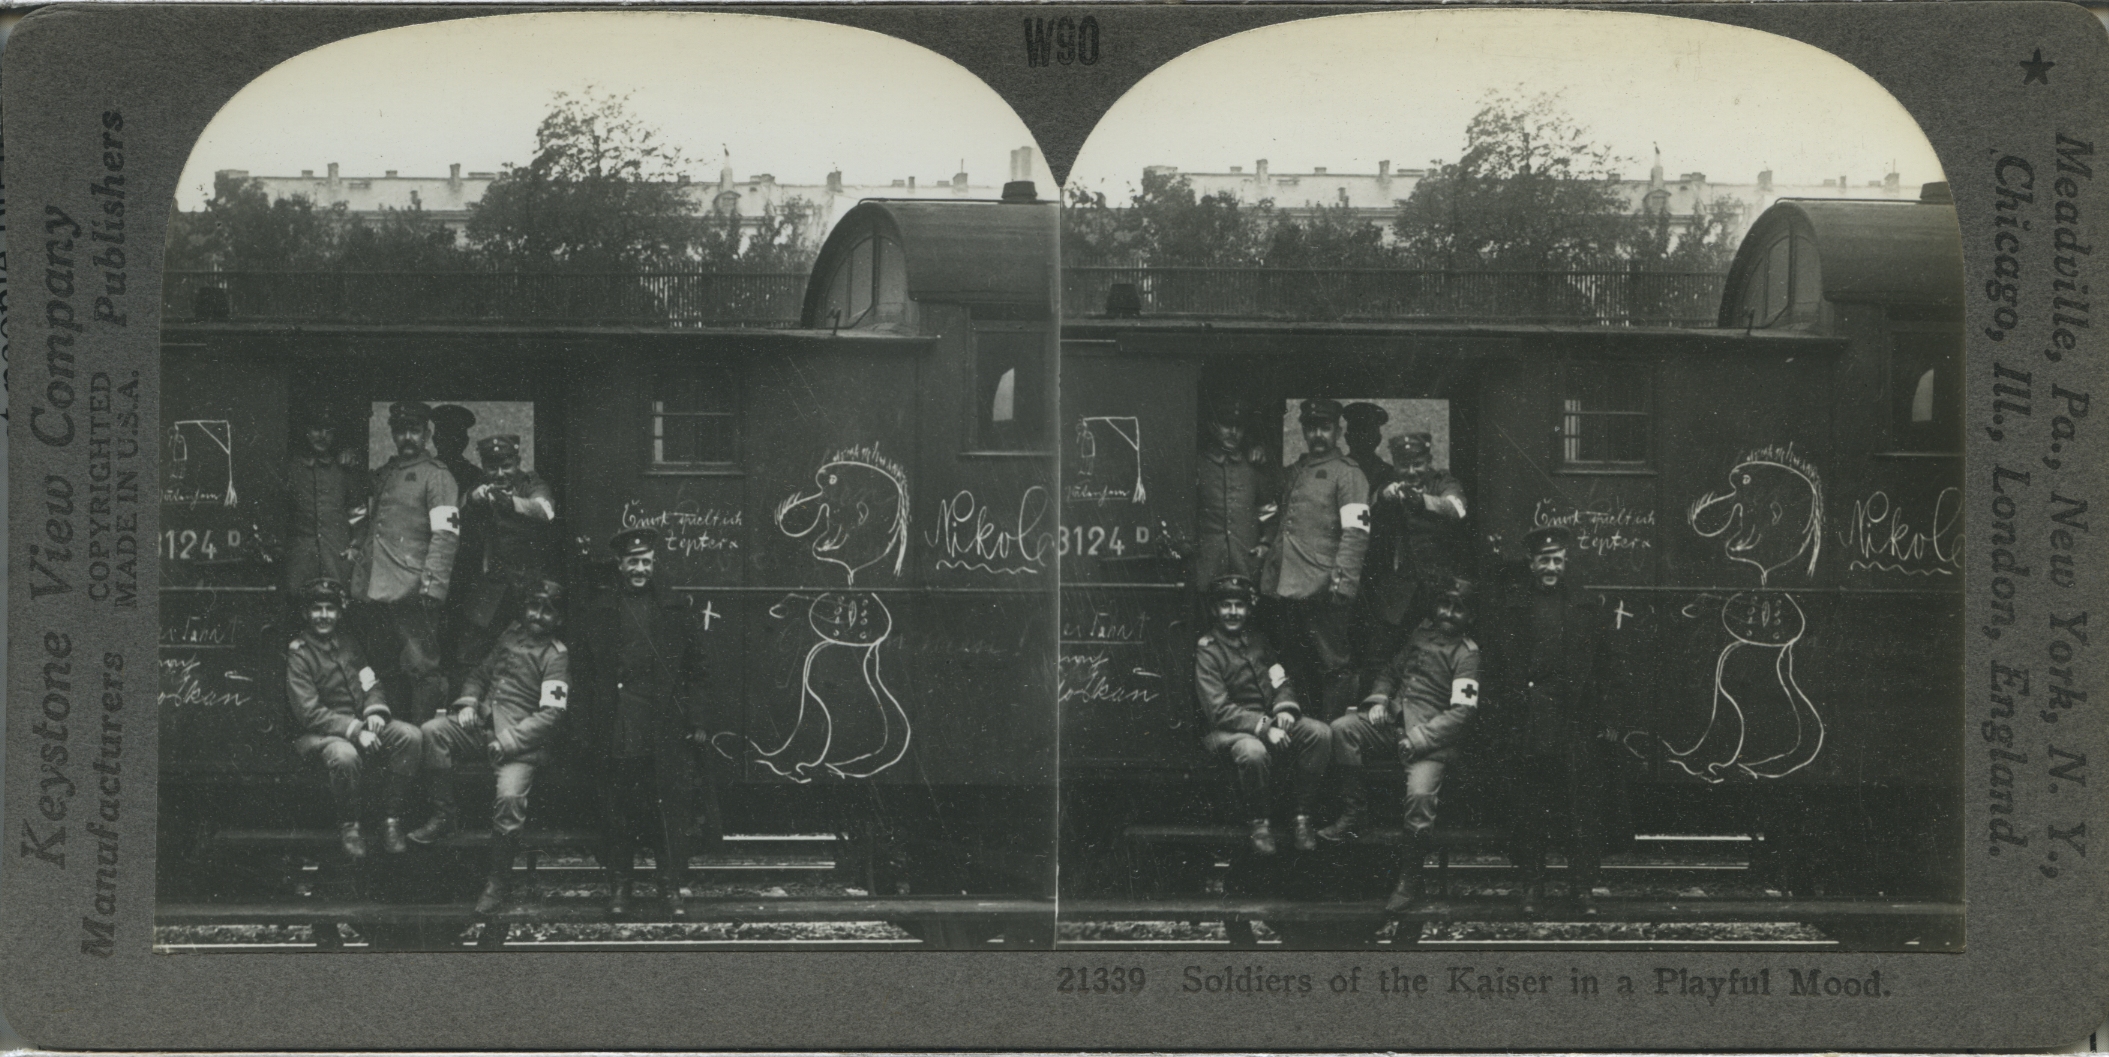 Soldiers of the Kaiser in a Playful Mood